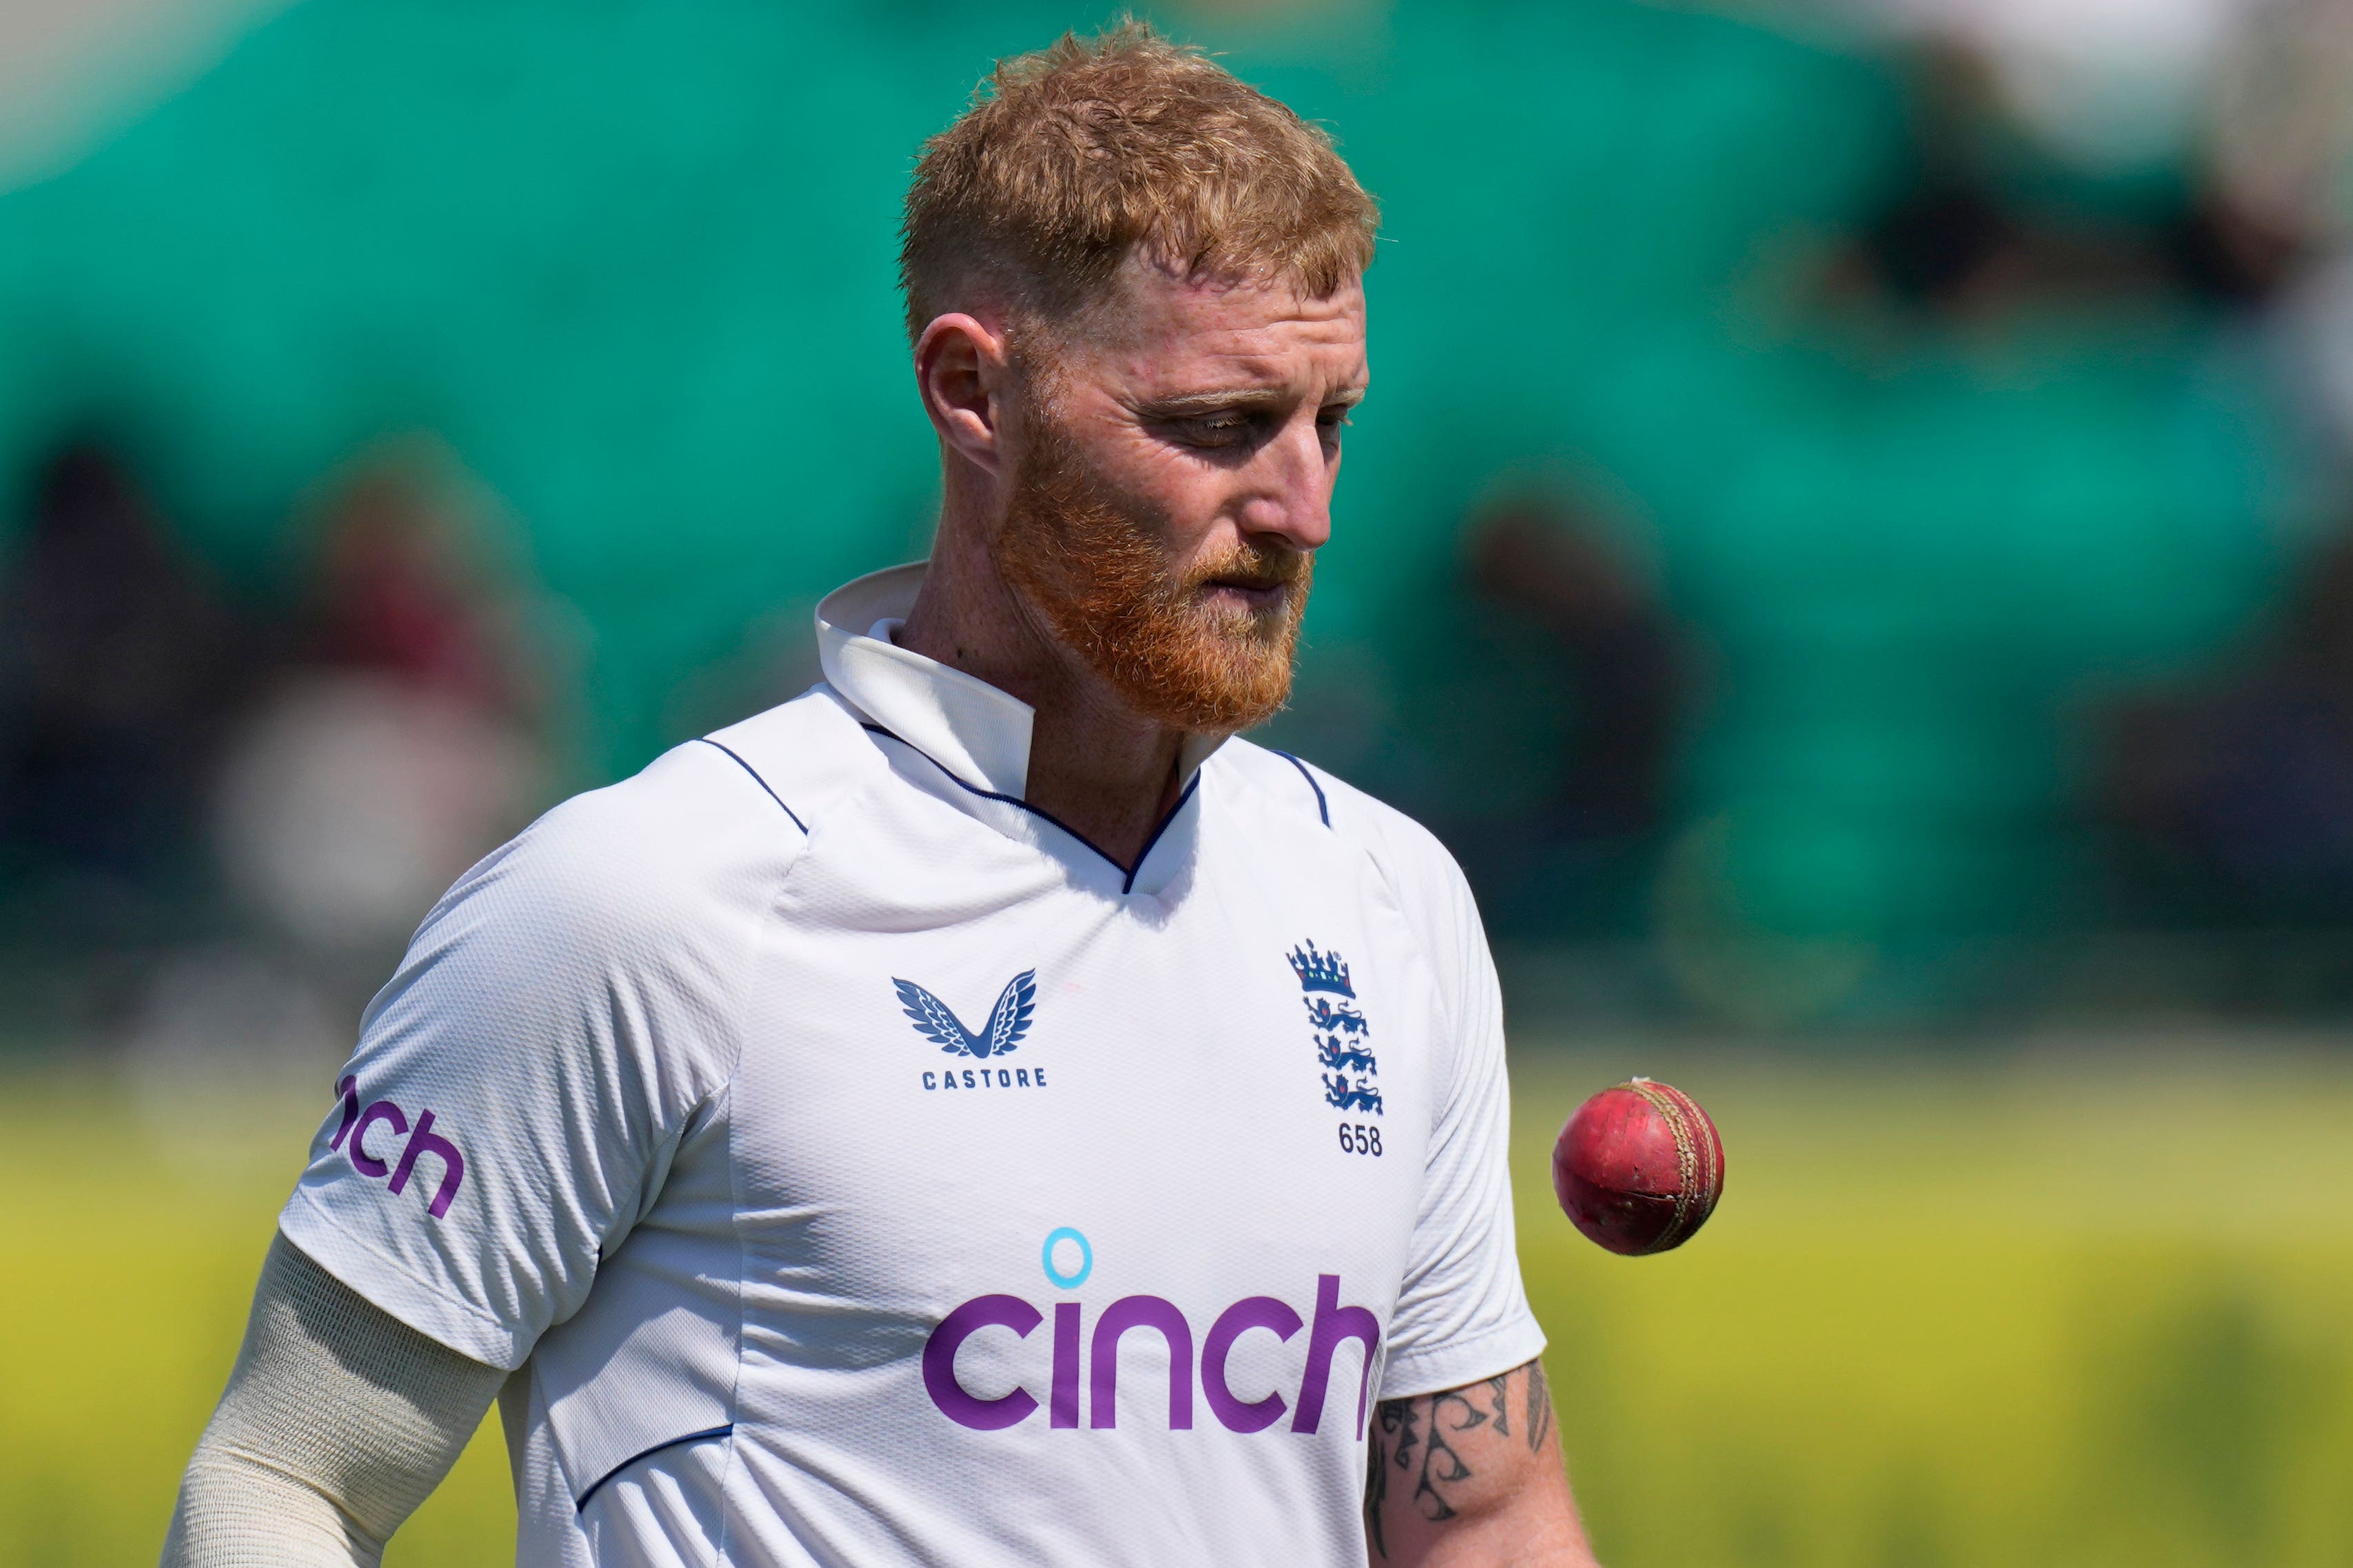 Ben Stokes provided a moment of magic on his bowling return